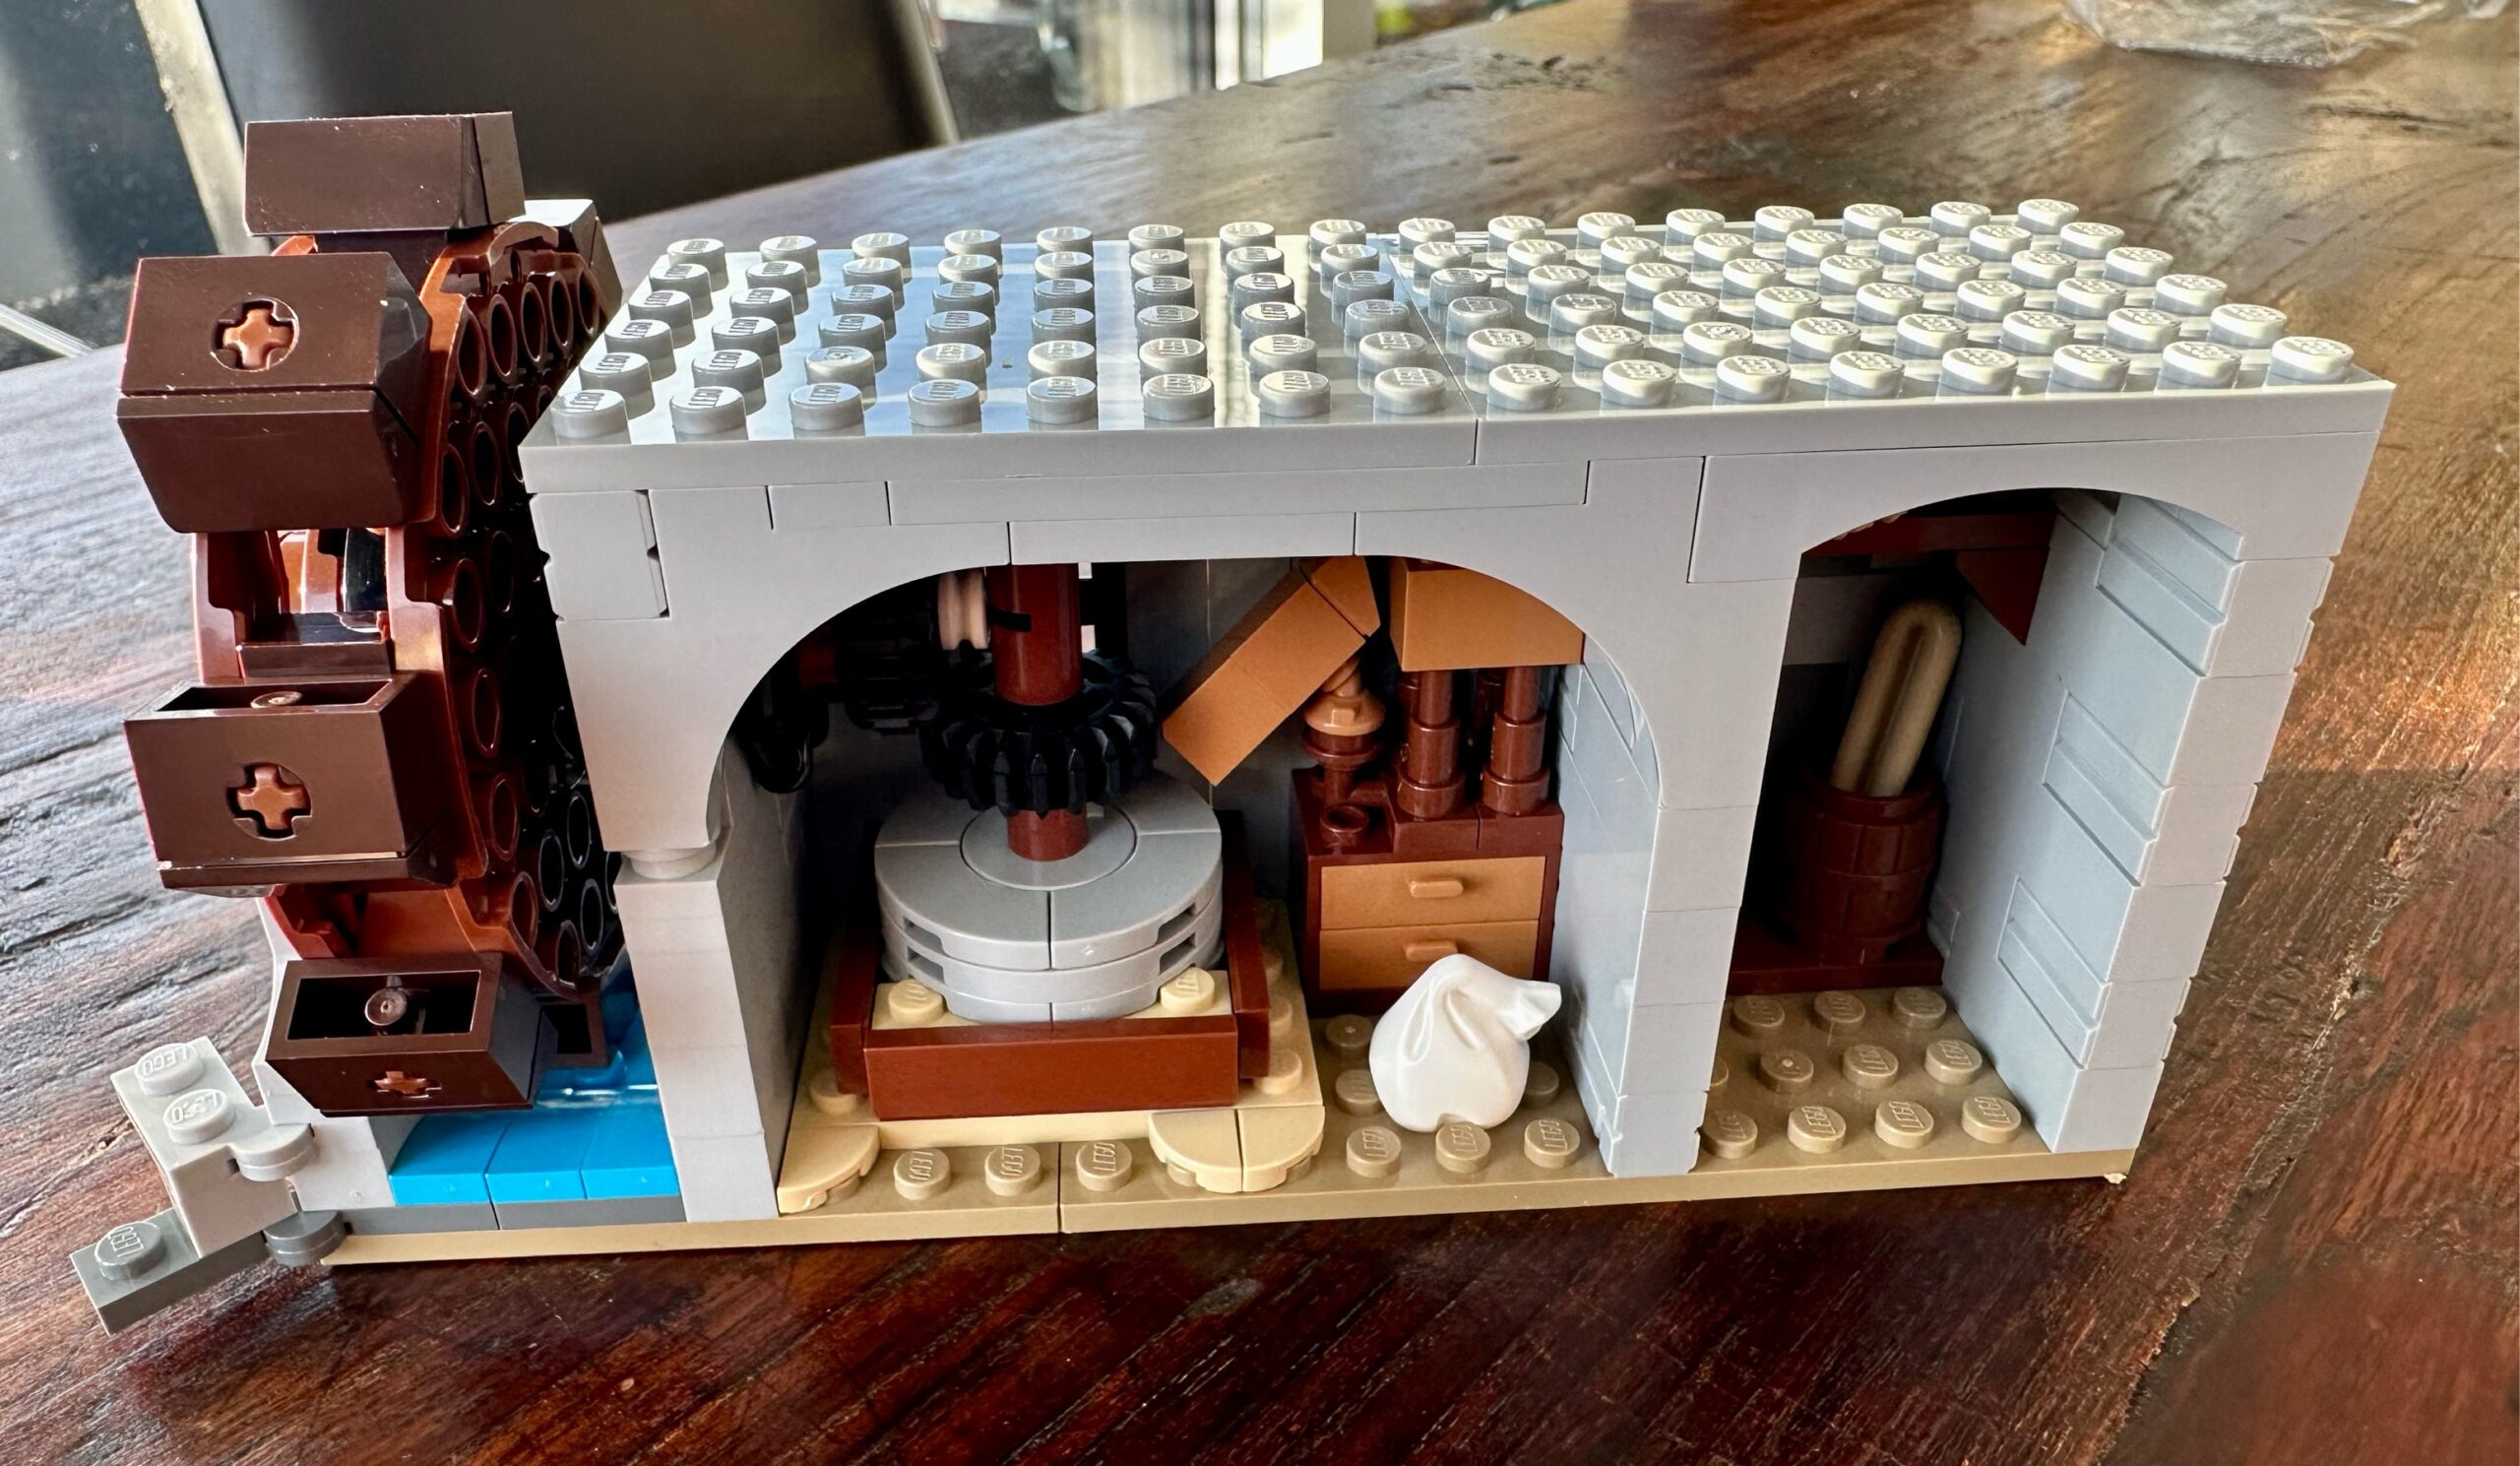 Interior view of LEGO castle section with a water wheel connected to a millstone. A storage system and hopper feeds grain to the millstone. A sack (containing flour?) sits on the floor. A storage room has a baguette stuffed into a barrel and a shelf with a bird's nest.